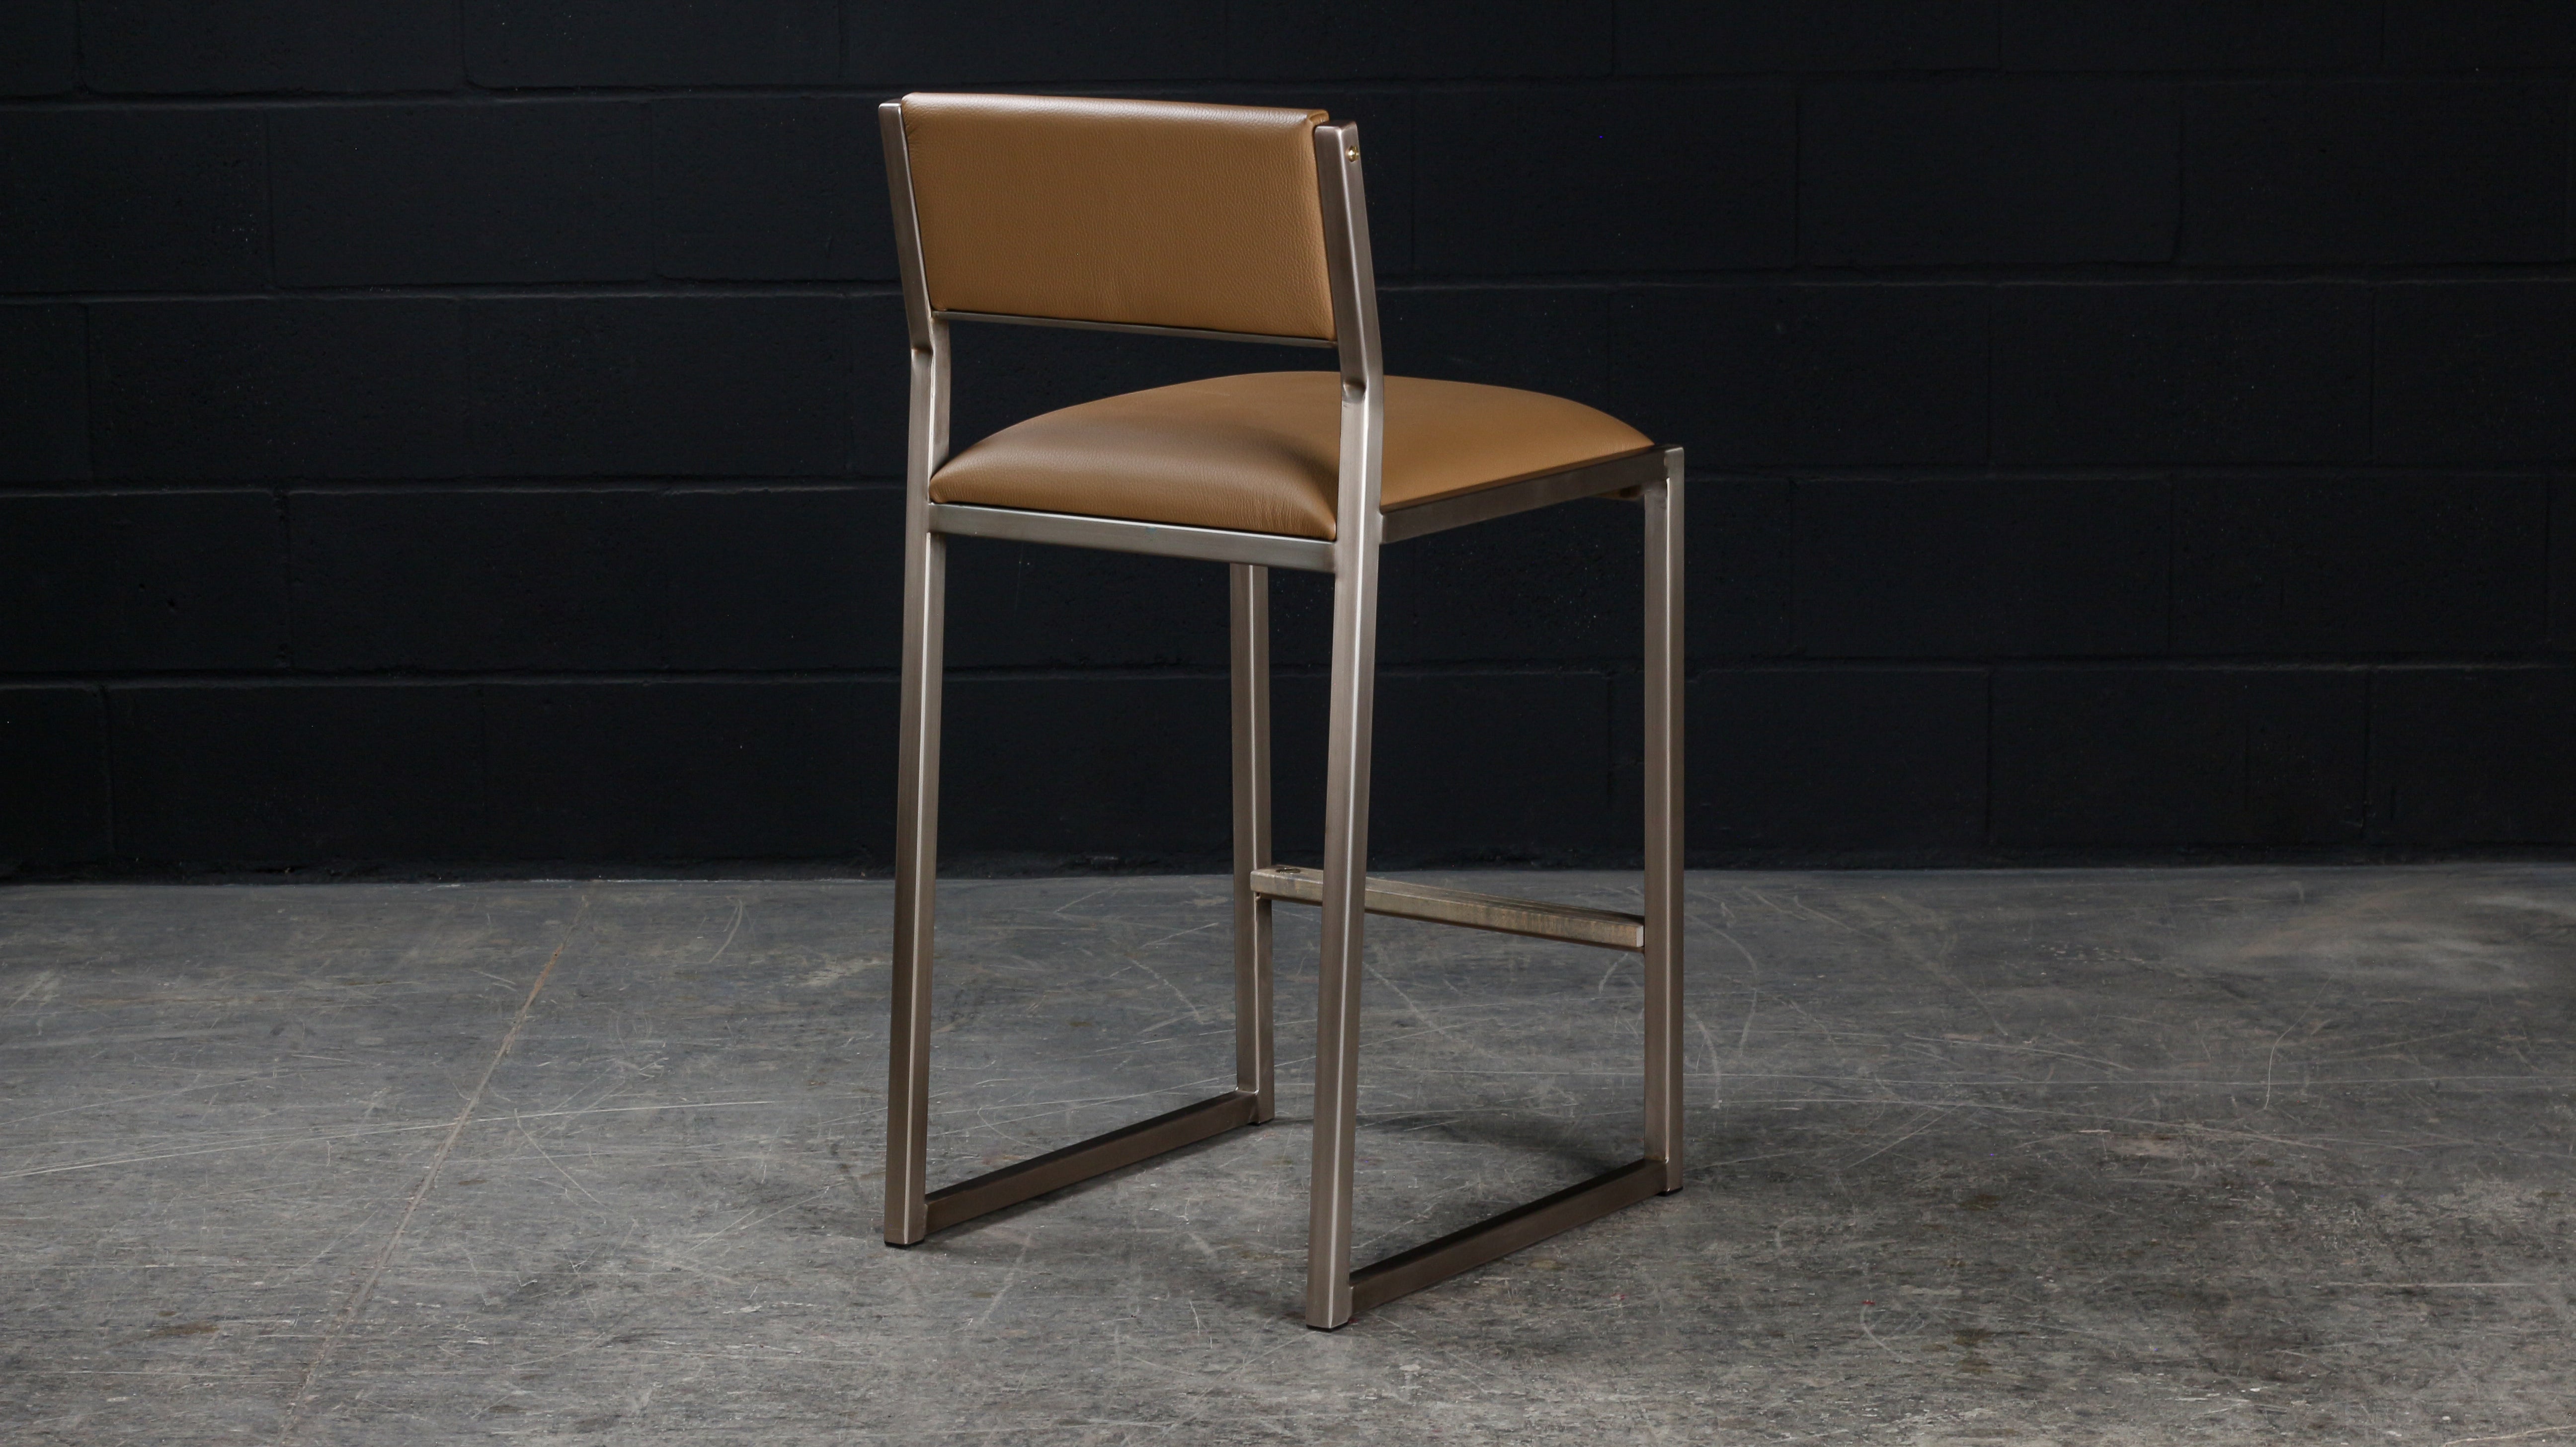 The shaker modern counter stool chair is handmade to order. Featuring our optional Luxurious Dull Champagne metal frame and a Genuine leather seat and back. Also offered in COM or COL. Inspired by the boarding ladder steps of an old boat. The